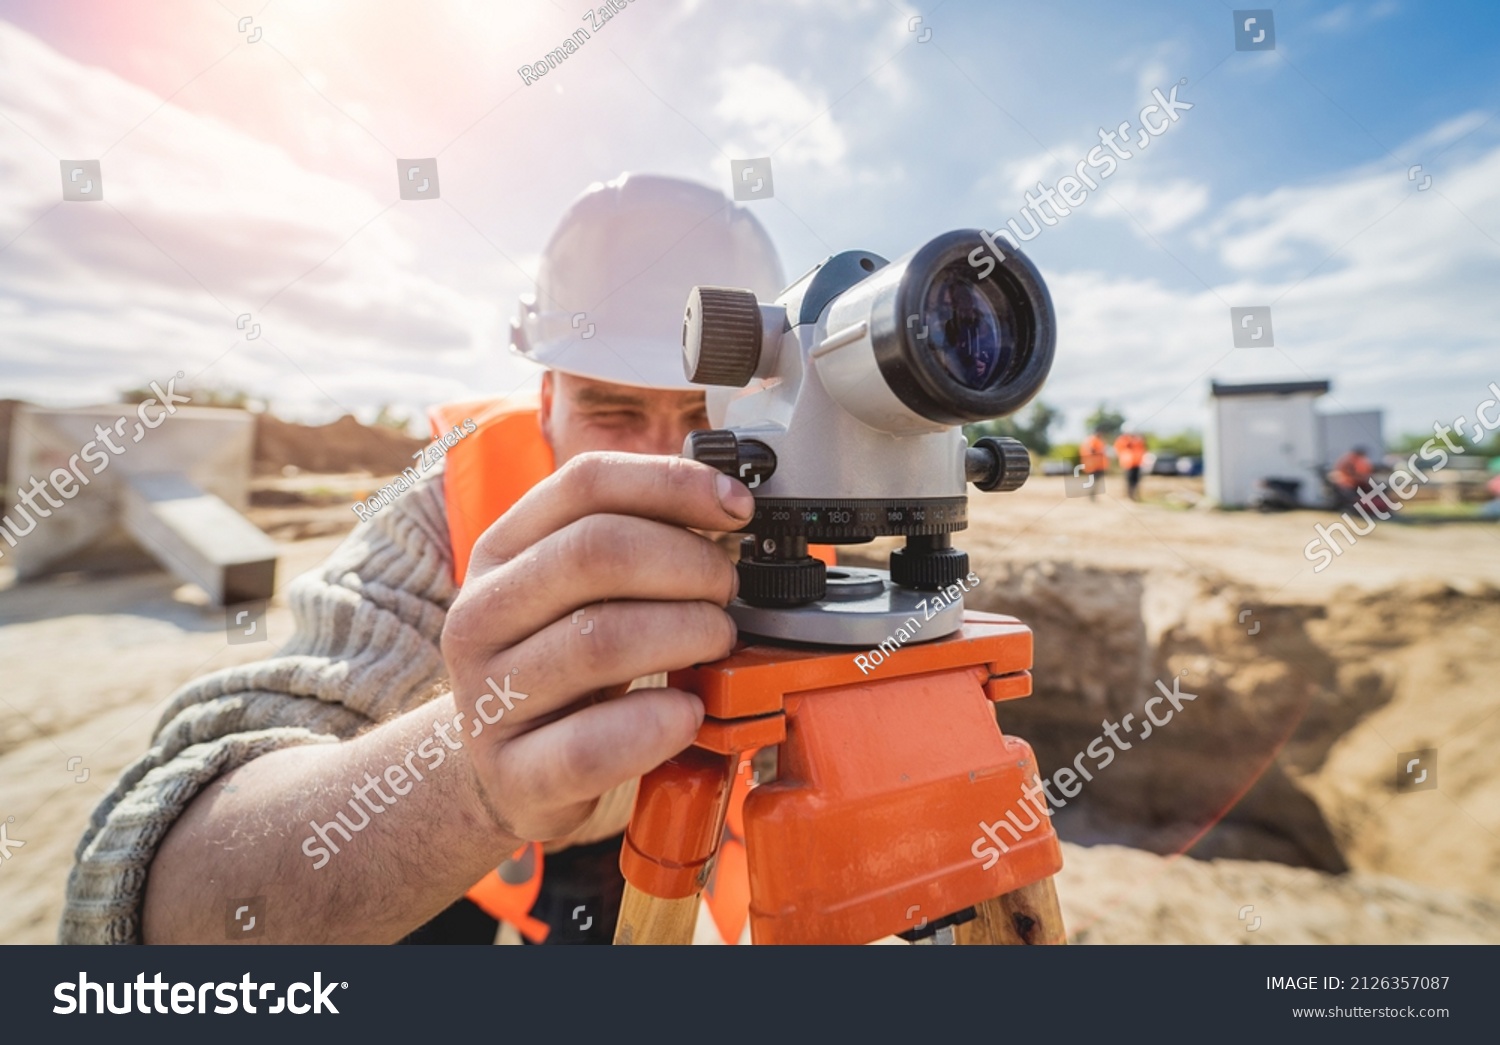 Surveyor worker with theodolite equipment at construction site #2126357087